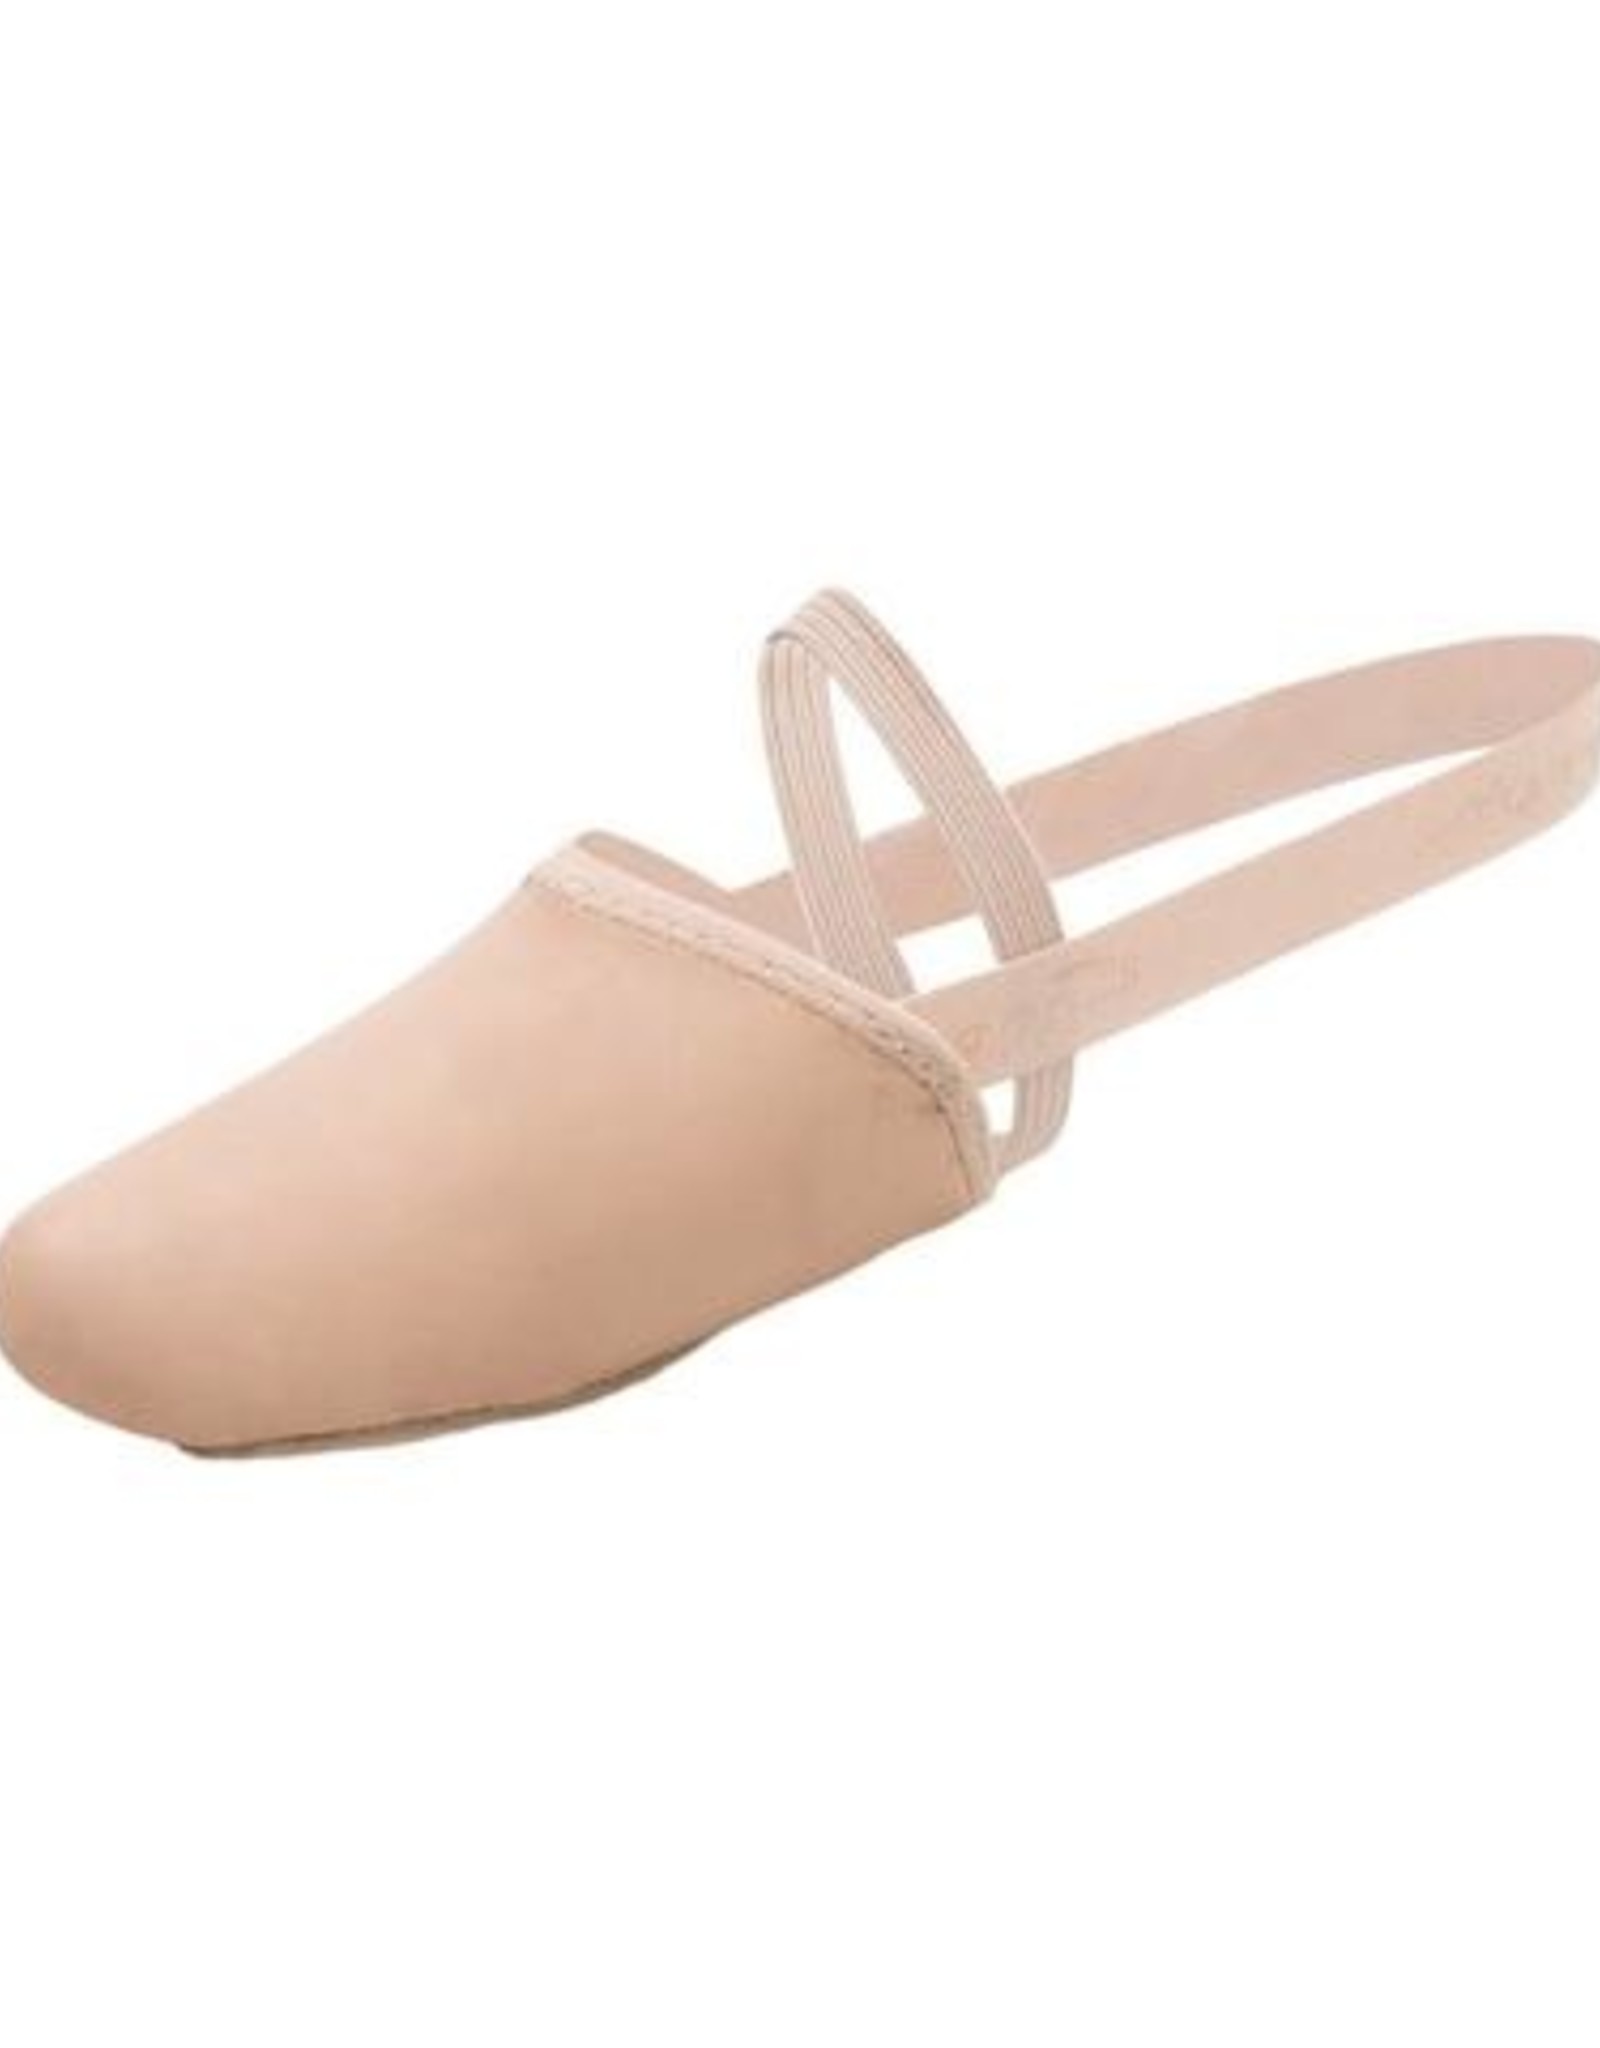 CAPEZIO CANVAS PIROUETTE ll TURNING SHOES (H061)